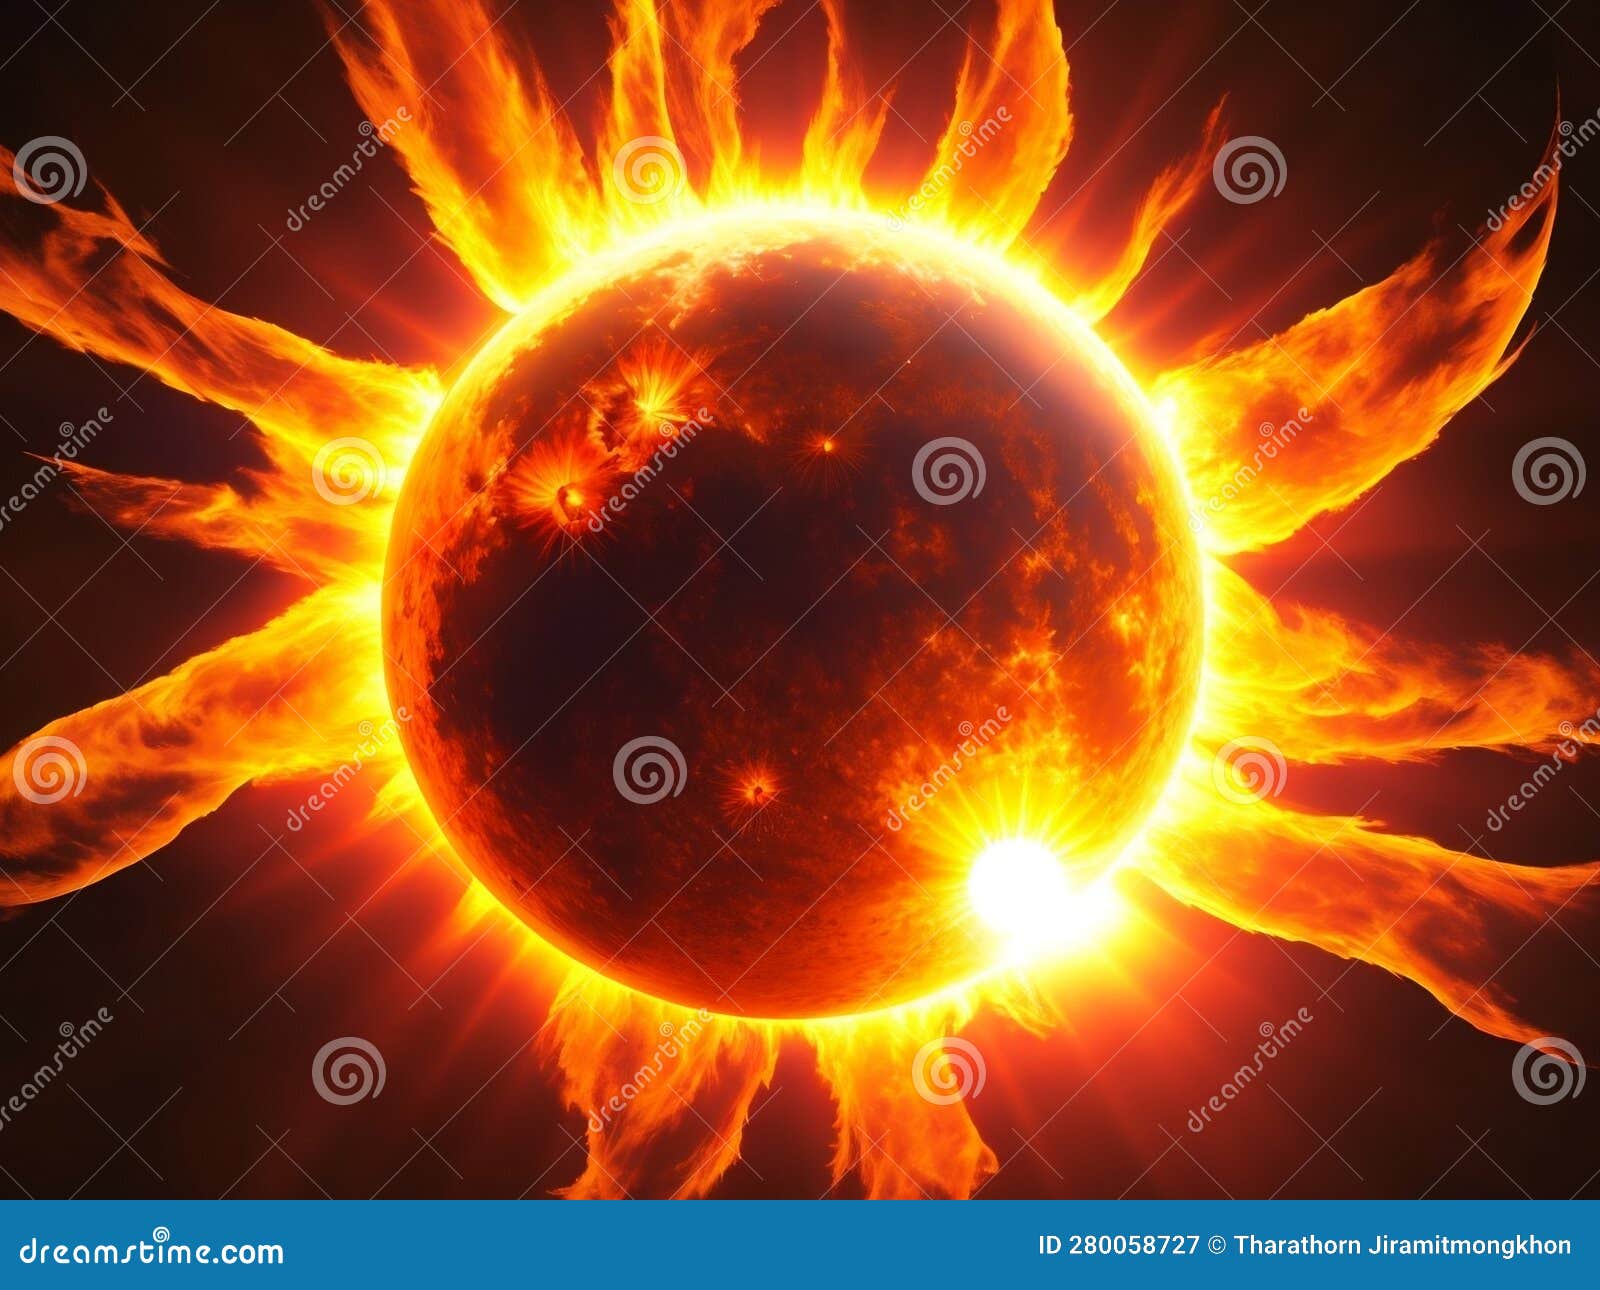 Premium Vector | 3d realistic sun vector with summer time title in a  background with hand drawing summer elements